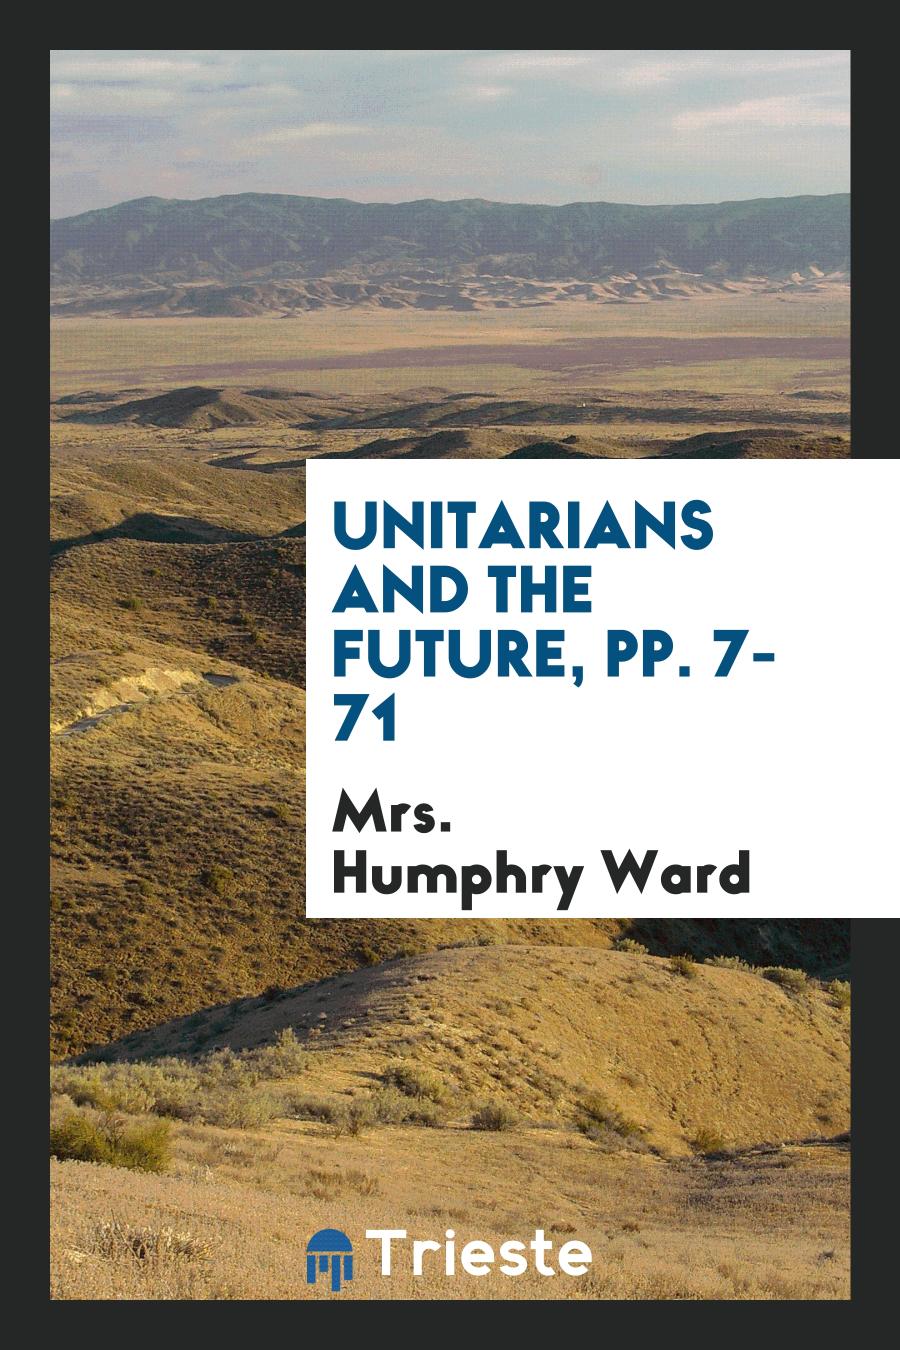 Unitarians and the Future, pp. 7-71